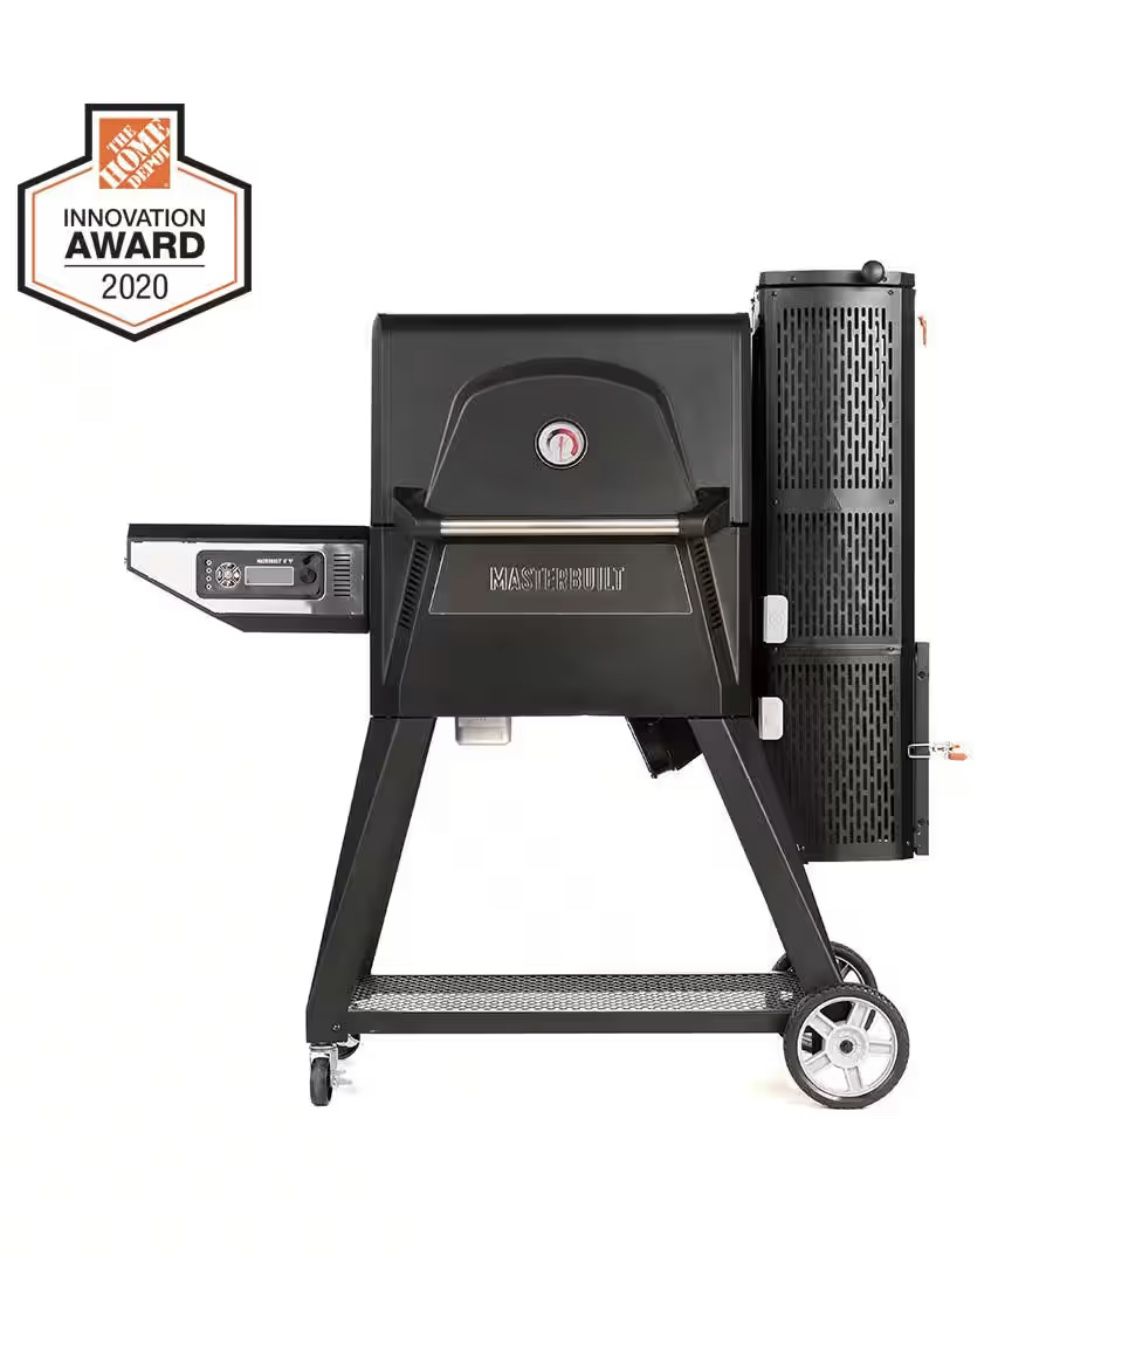 Masterbuilt® Gravity Series® 560 Digital Charcoal Grill + Smoker - MB(contact info removed)0